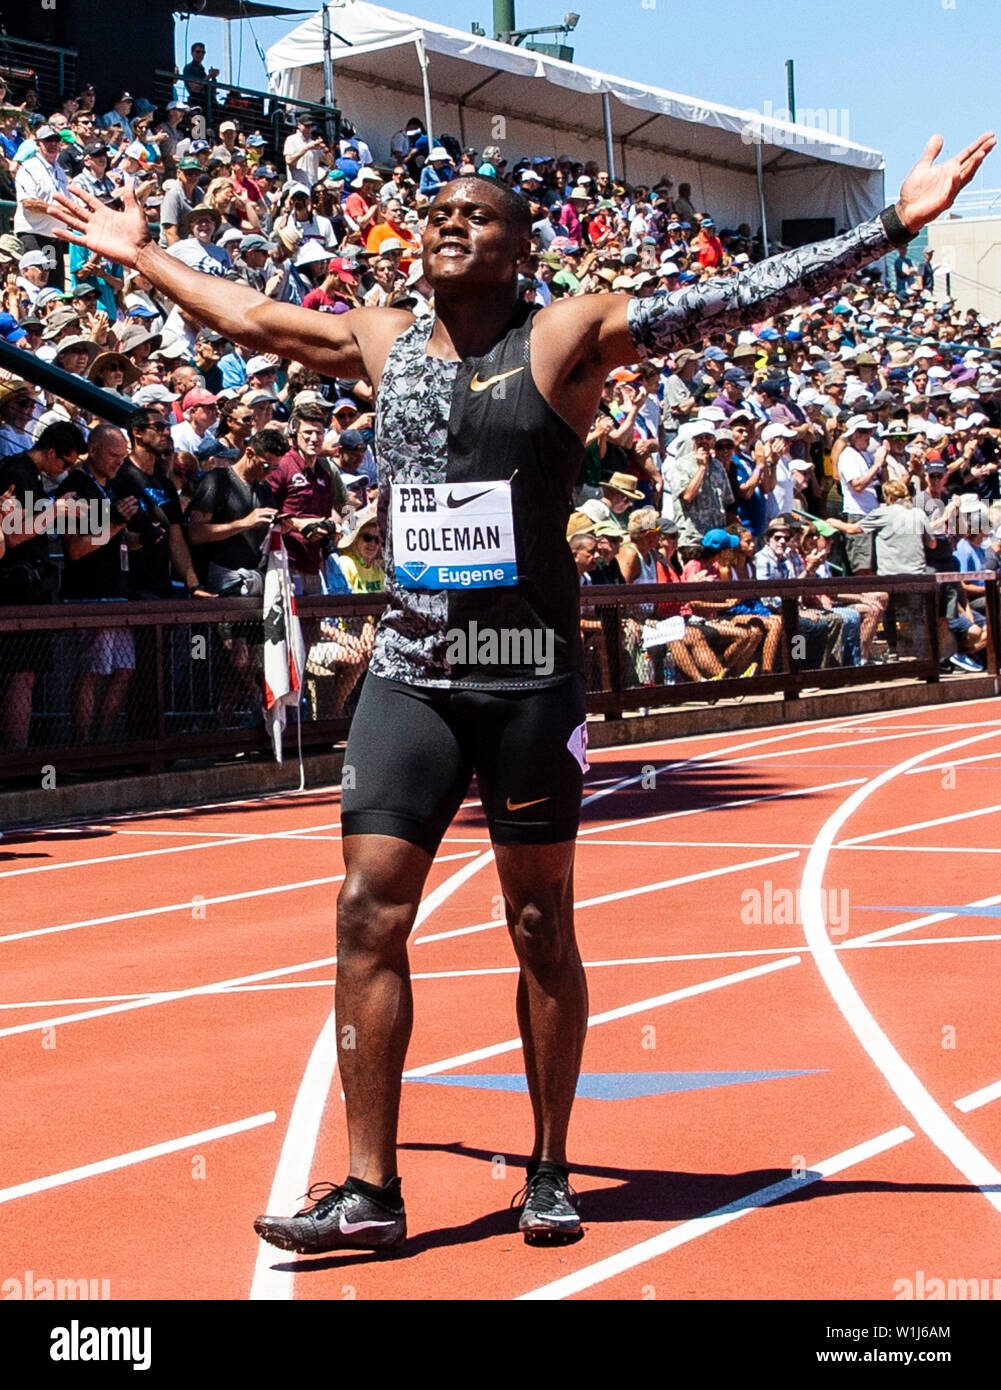 Stanford, CA. 30th June, 2019. Christian Coleman wins the Men's 100 meter with a time of 9.81 during the Nike Prefontaine Classic at Stanford University Palo Alto, CA. Thurman James/CSM/Alamy Live News Stock Photo